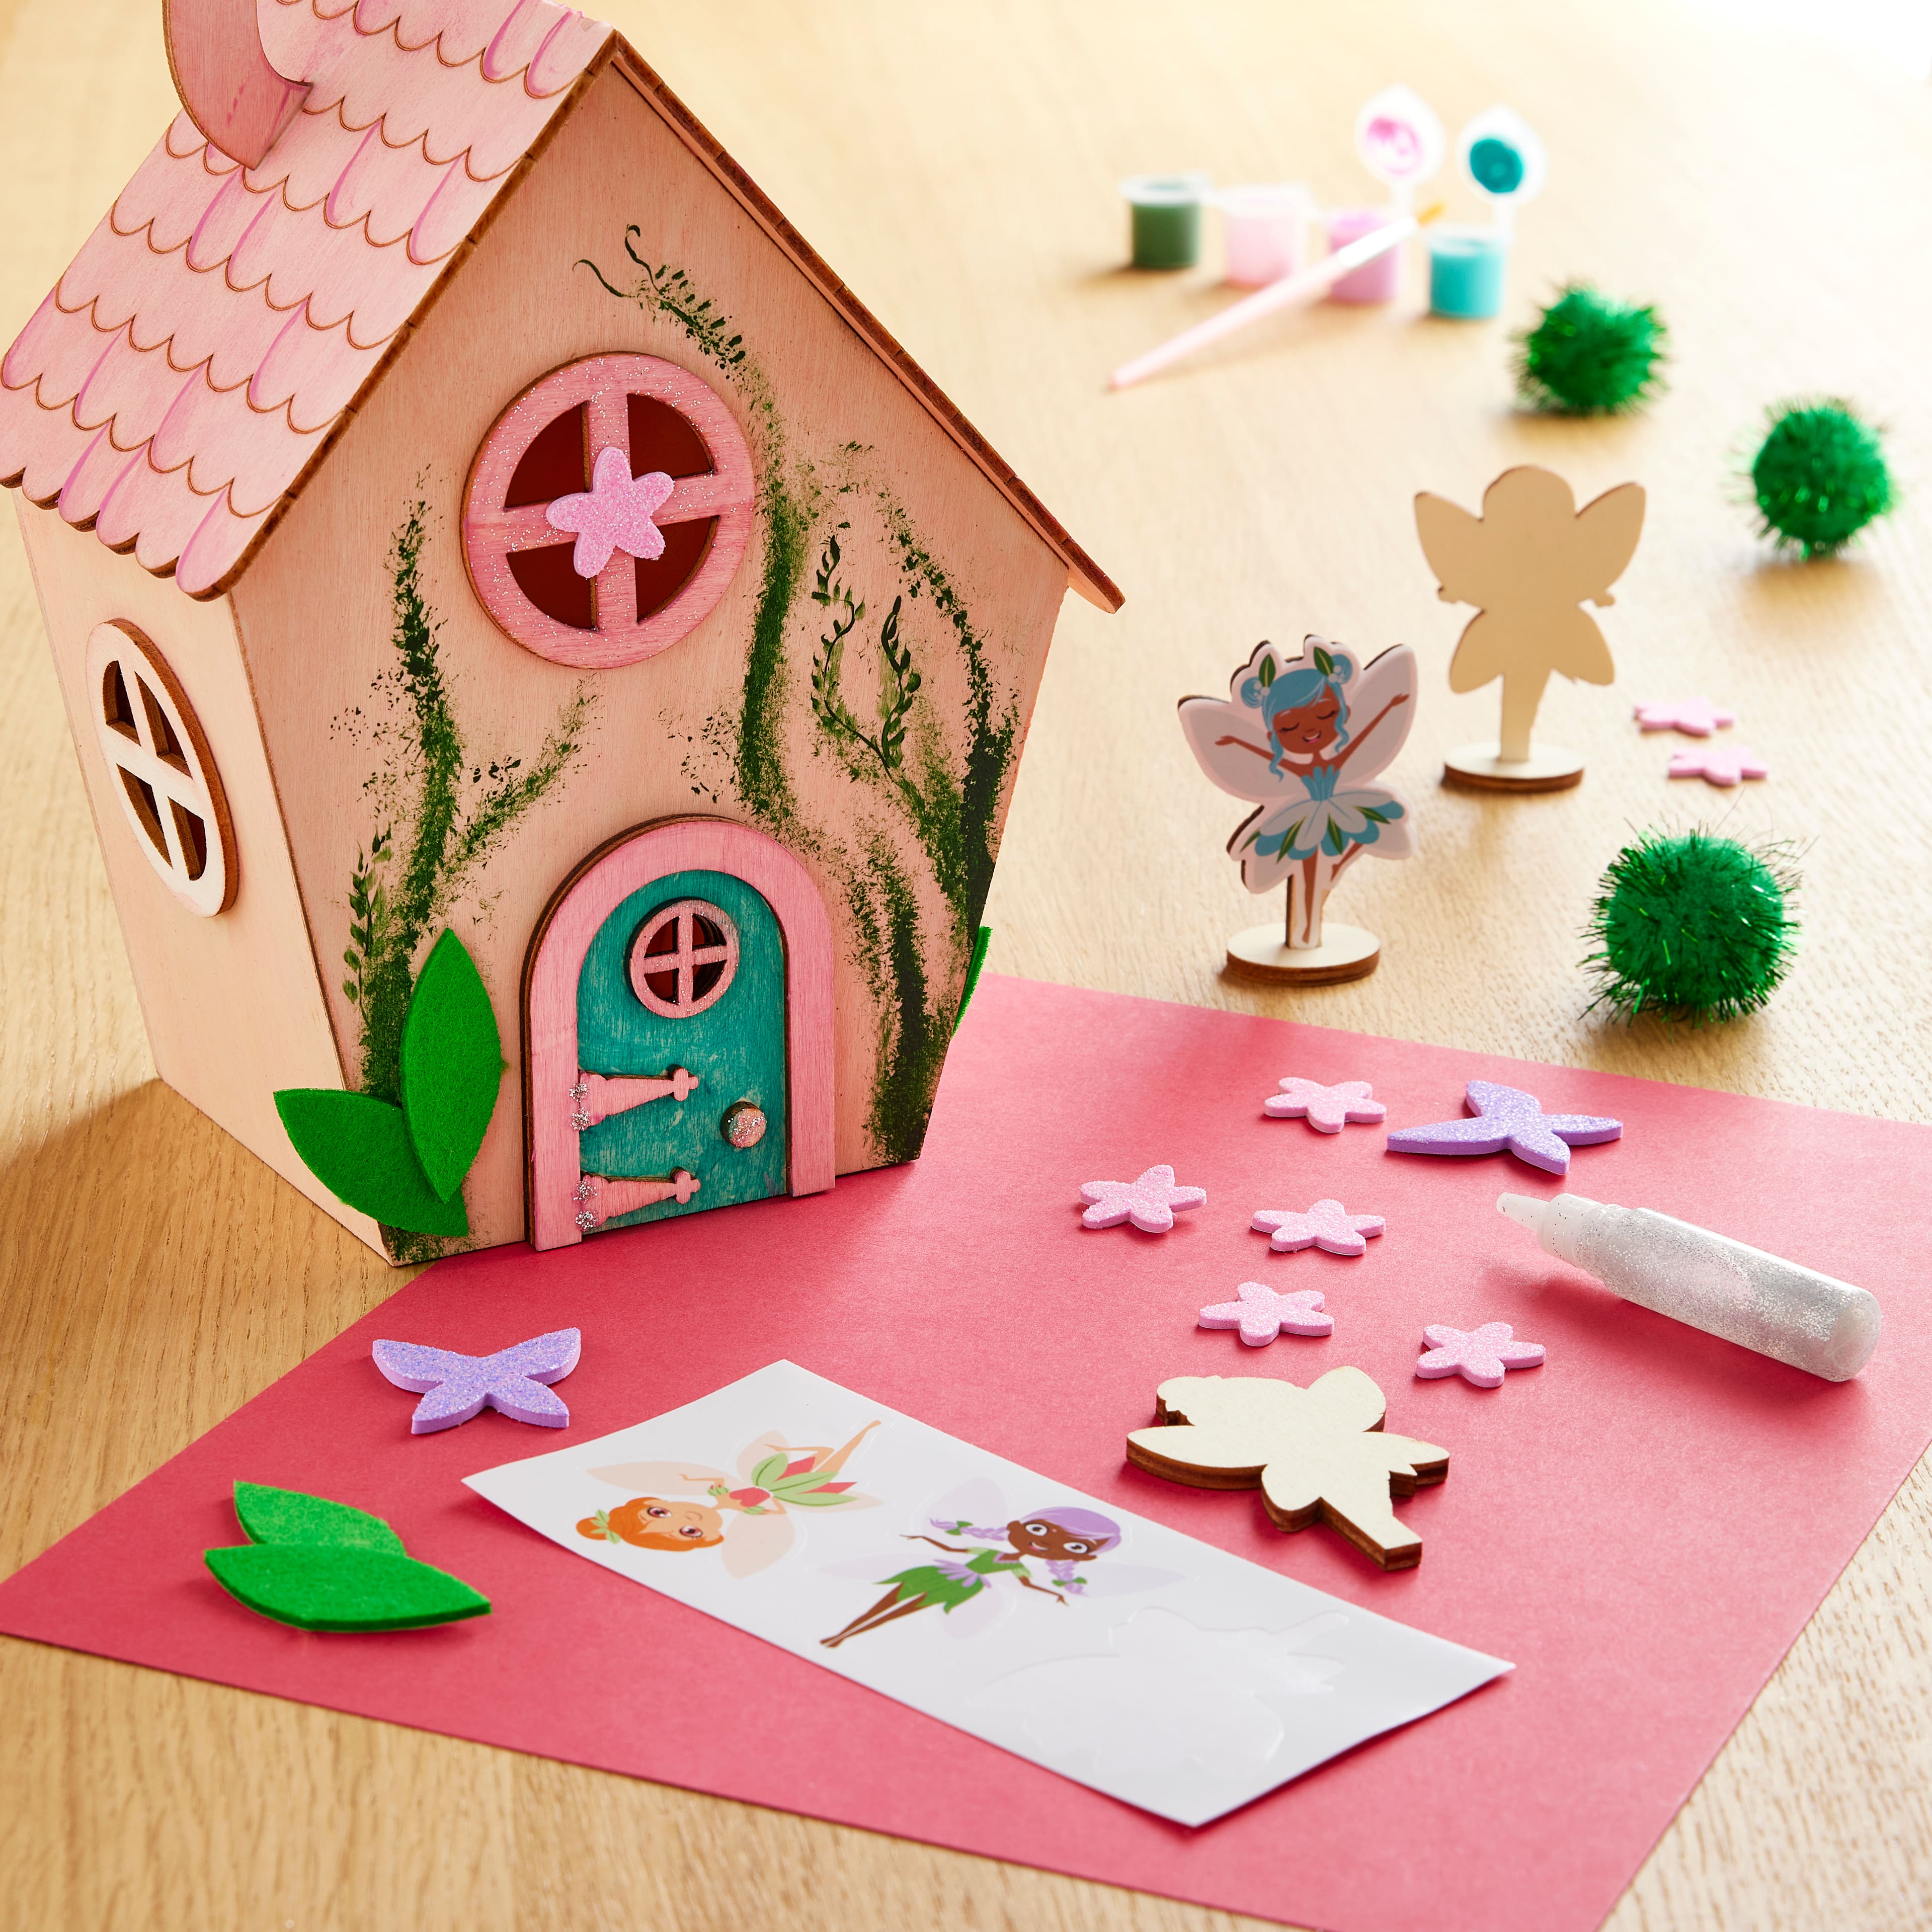 Fairy House Color-In 3D Wood Puzzle by Creatology&#x2122;